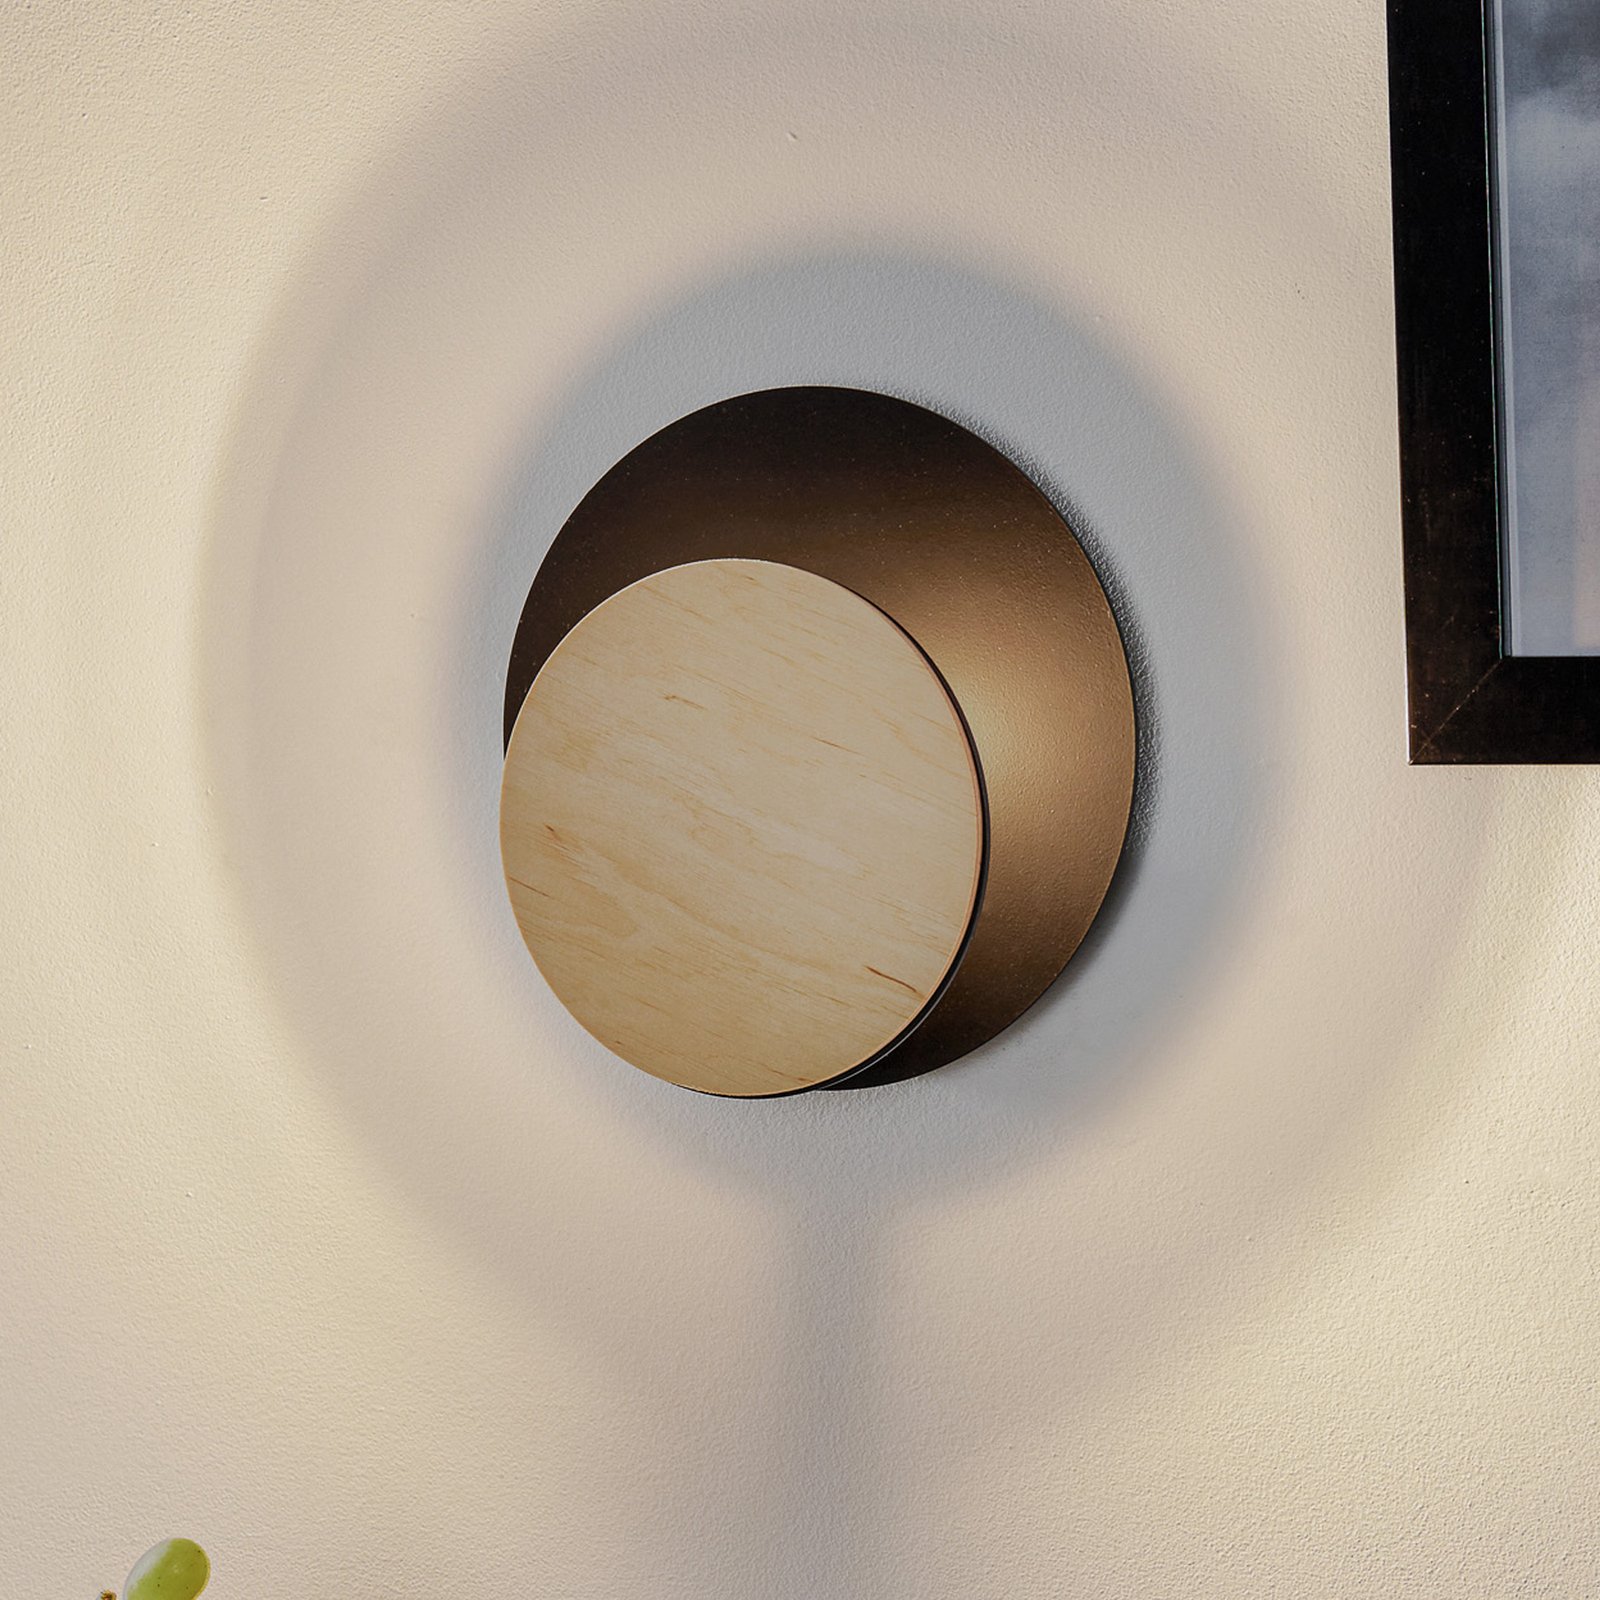 Circle wall lamp in black, wooden decorative panel